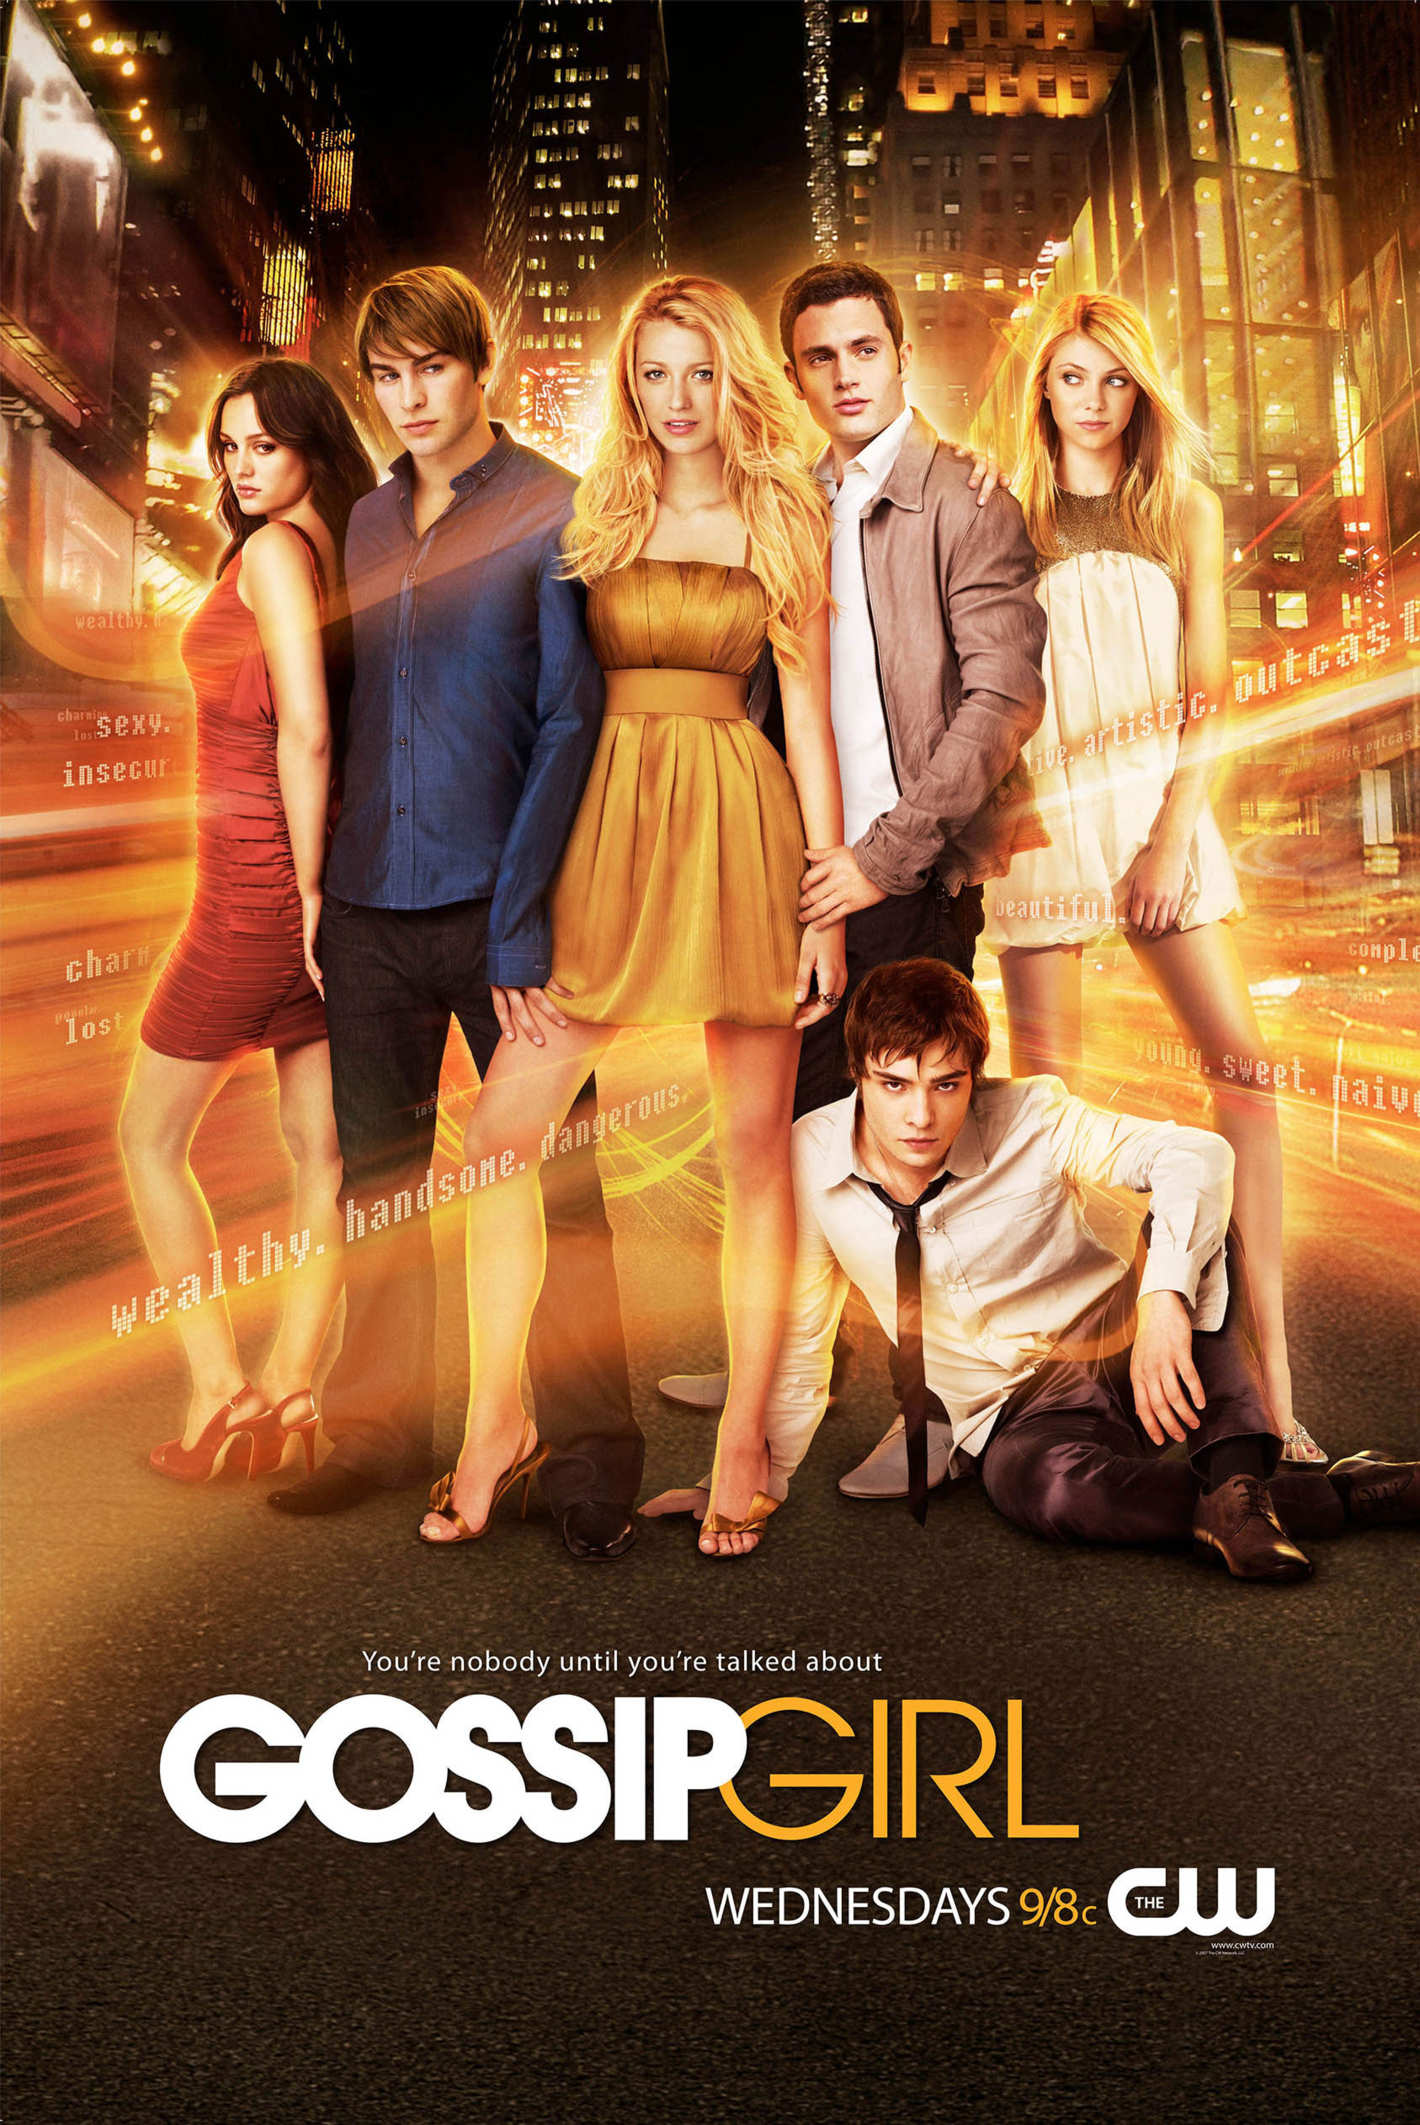 https://static.wikia.nocookie.net/gossipgirl/images/3/3f/S1Poster2.jpg/revision/latest?cb=20191222212324